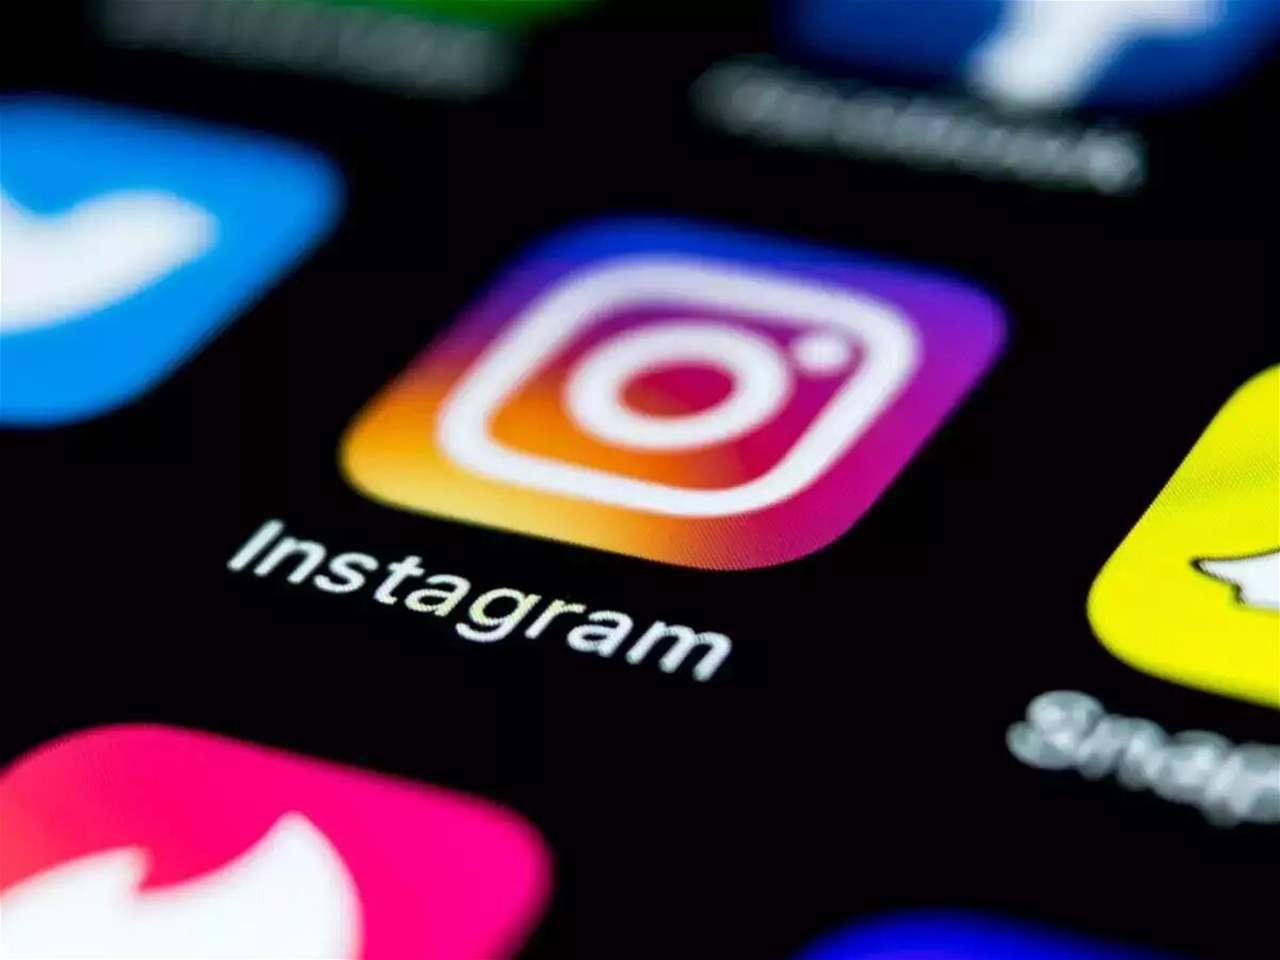 Instagram releases tools for parents to track teens' activity